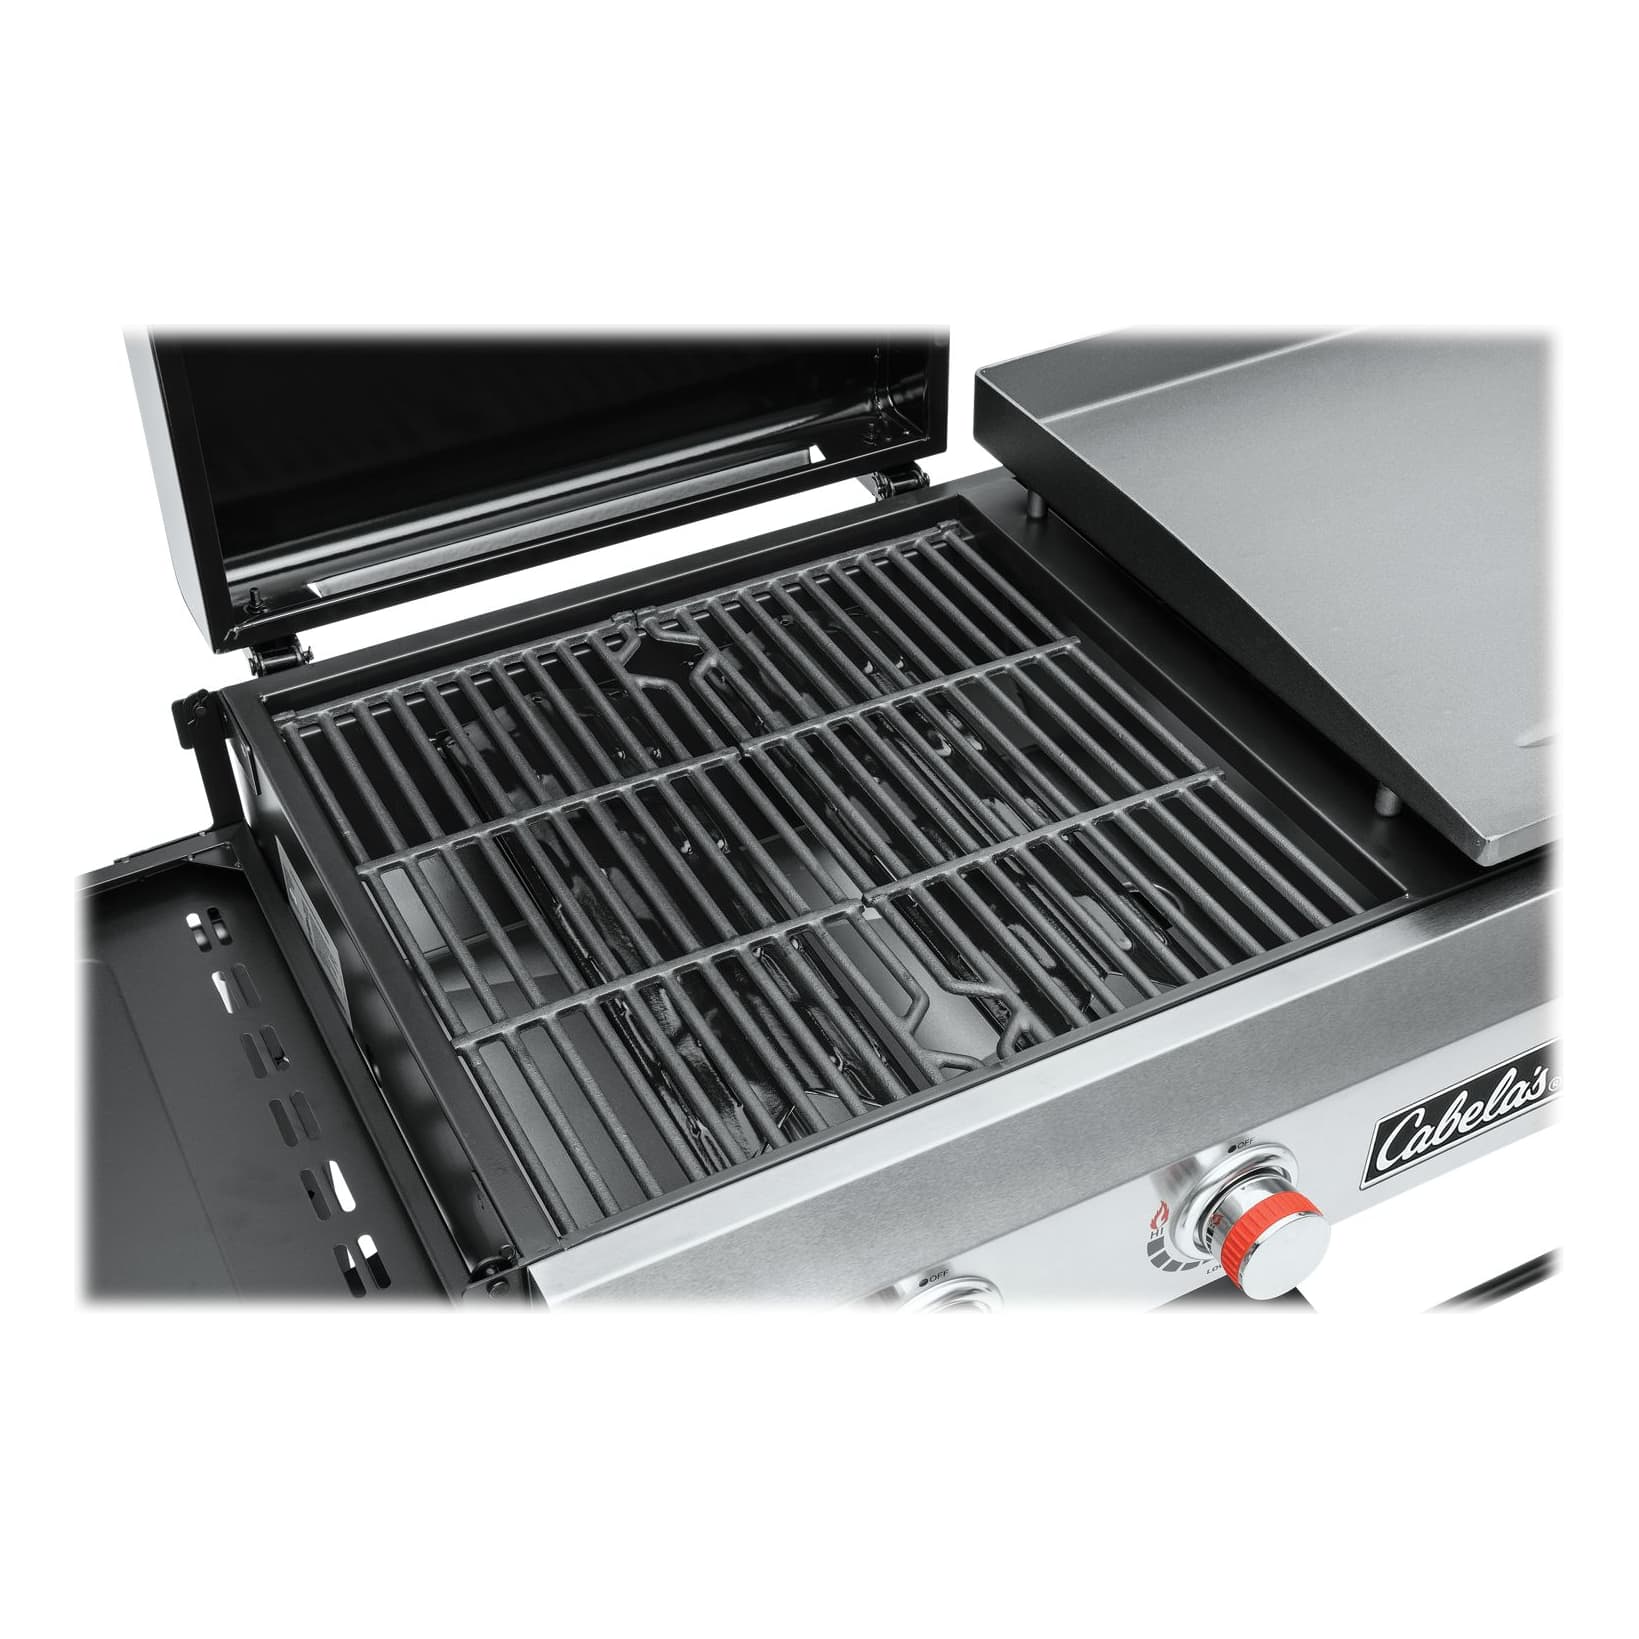 Cabela's® Deluxe 4-Burner Event Grill